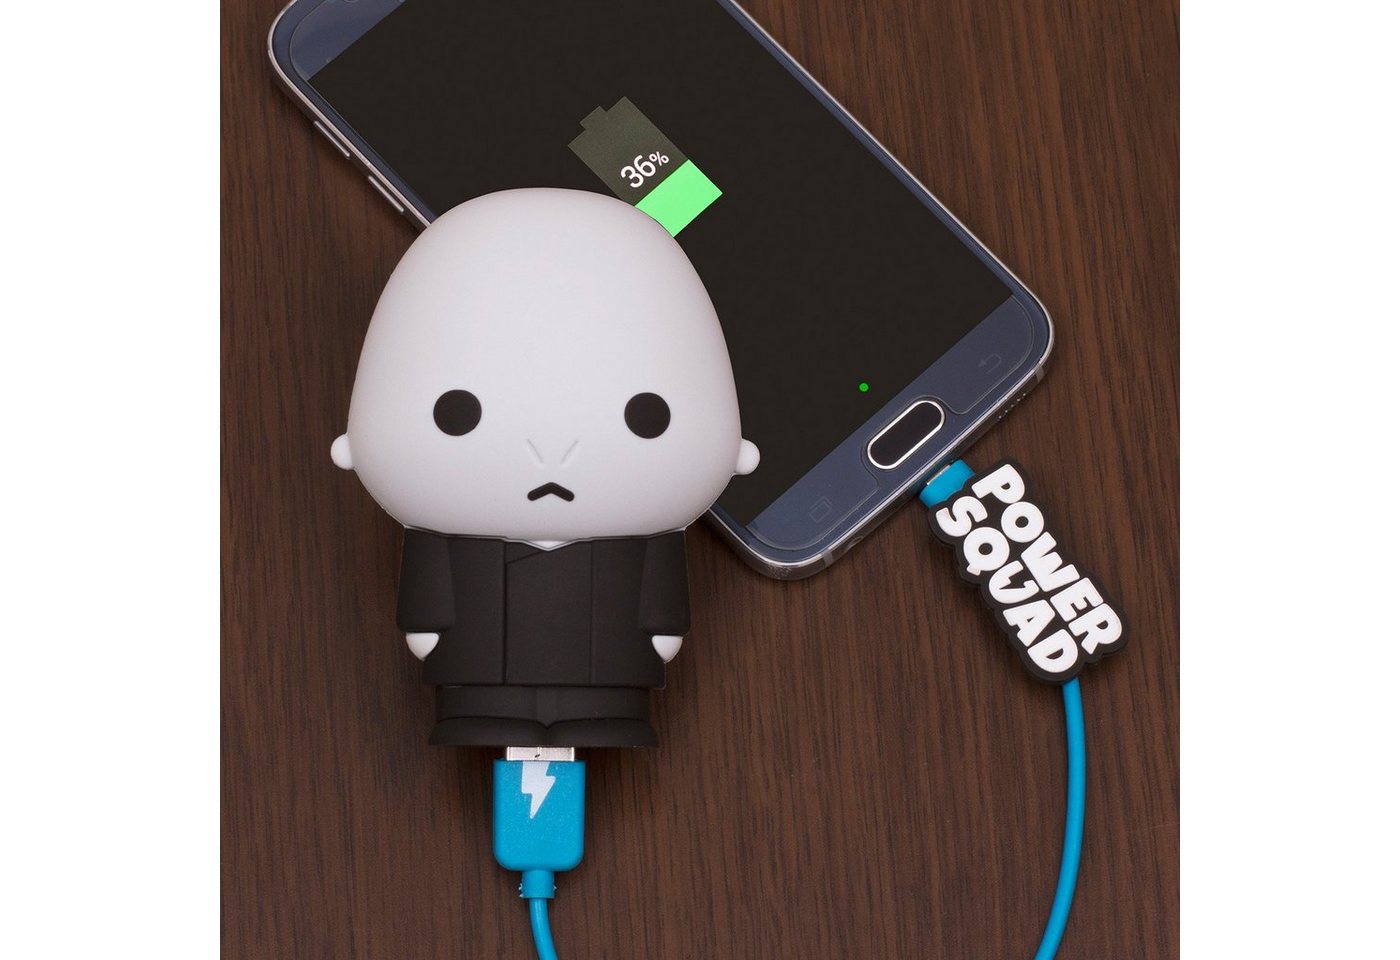 Thumbs Up PowerSquad - Powerbank WB Lord Voldemort" - Warner Bros. Powerbank Powerbank 2500 mAh" von Thumbs Up